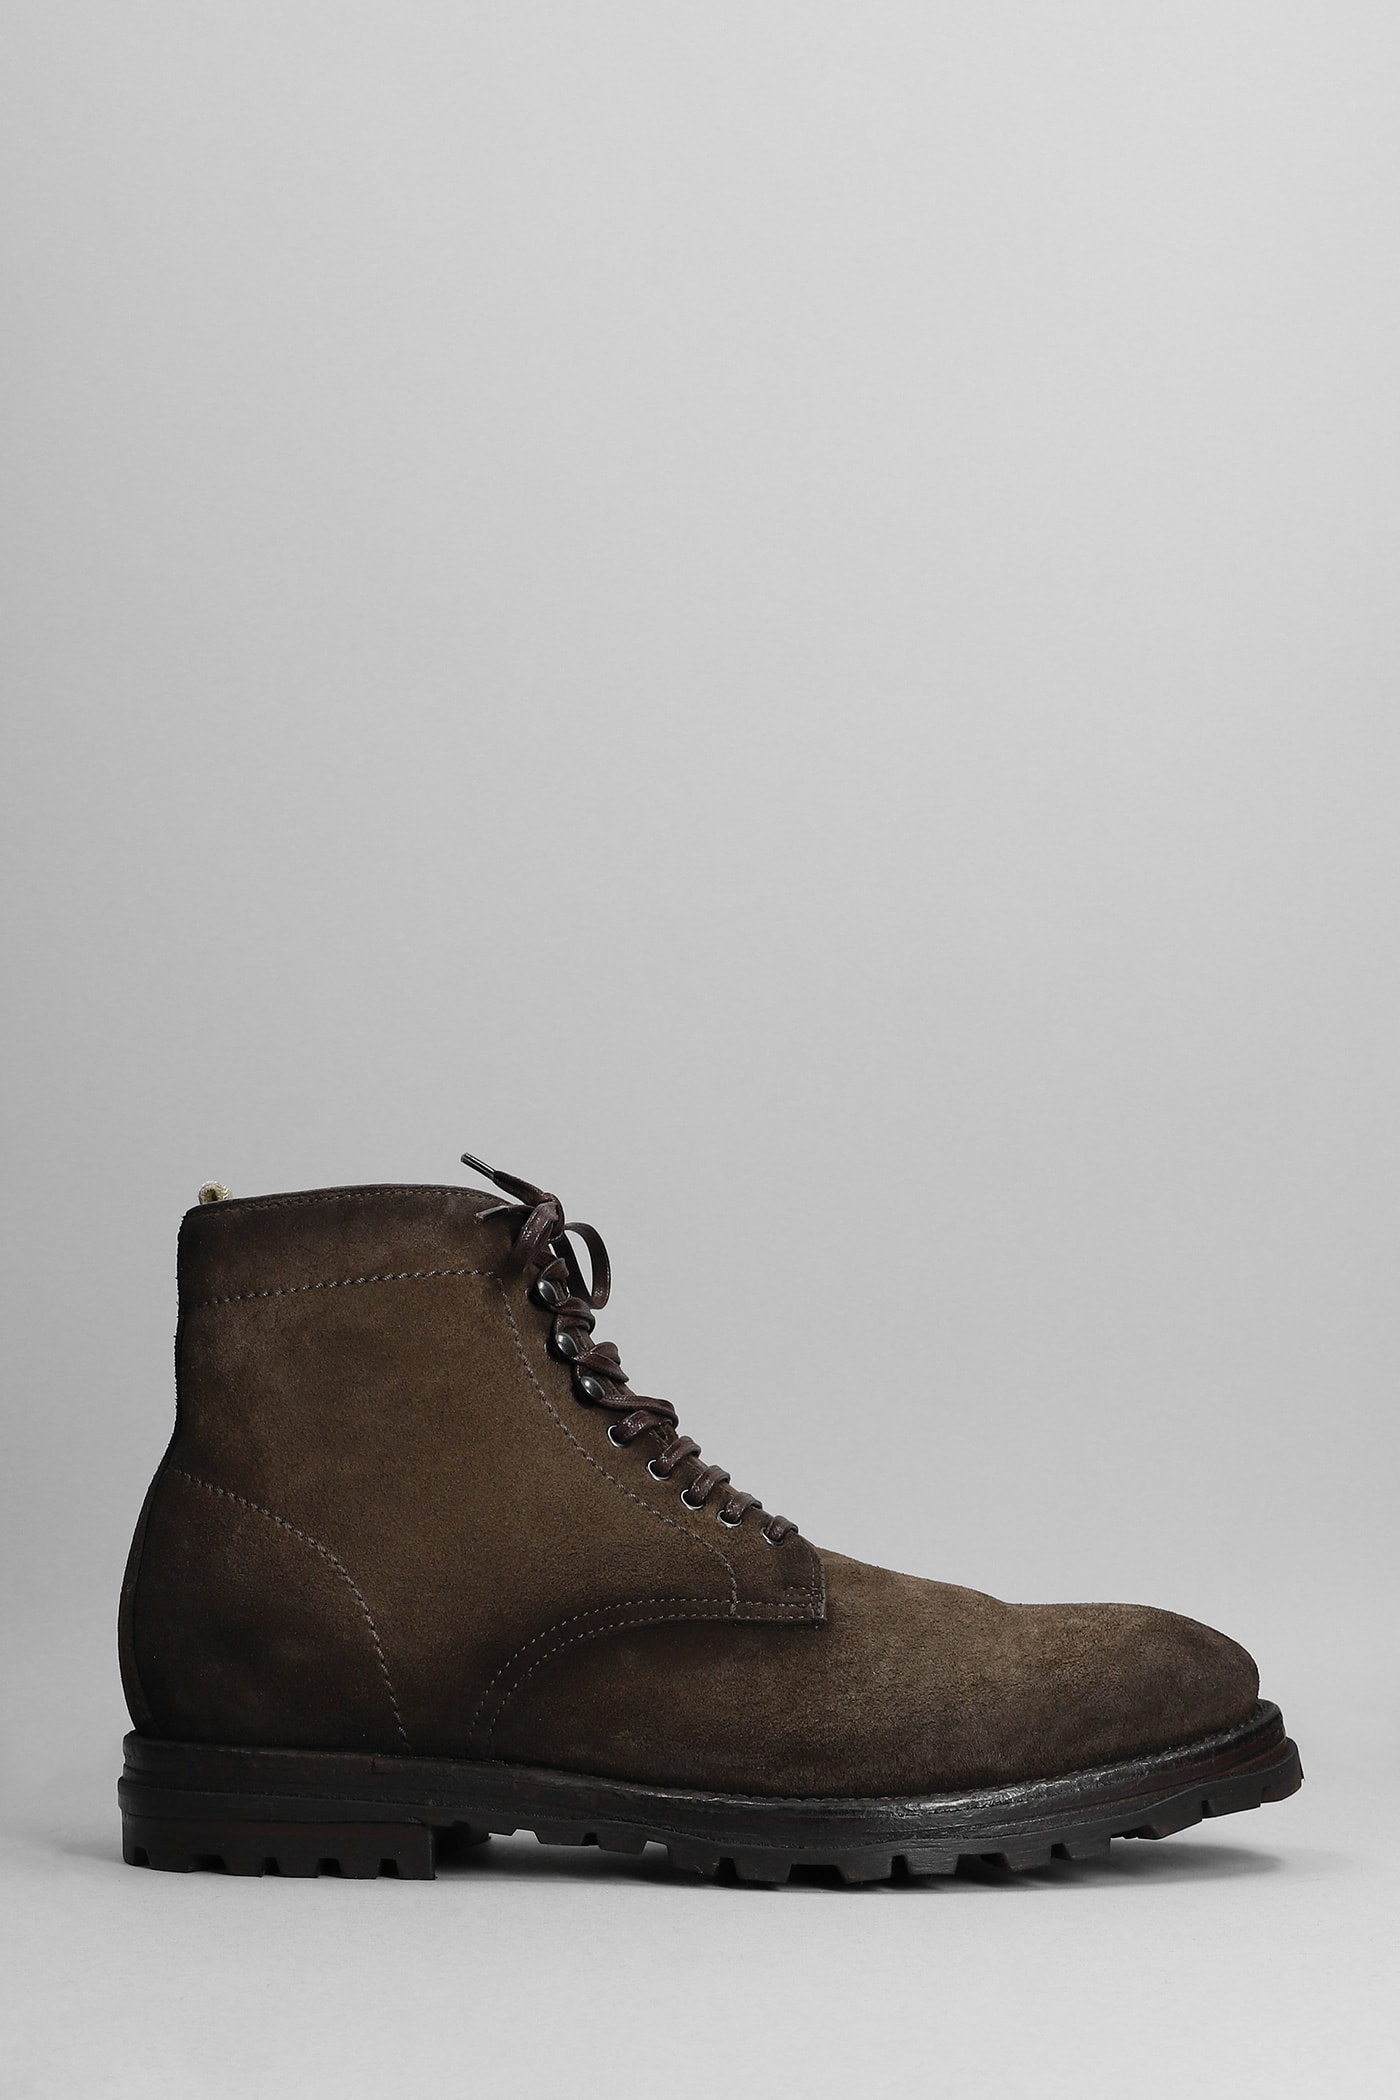 Officine Creative Vail 002 Ankle Boots In Brown Suede